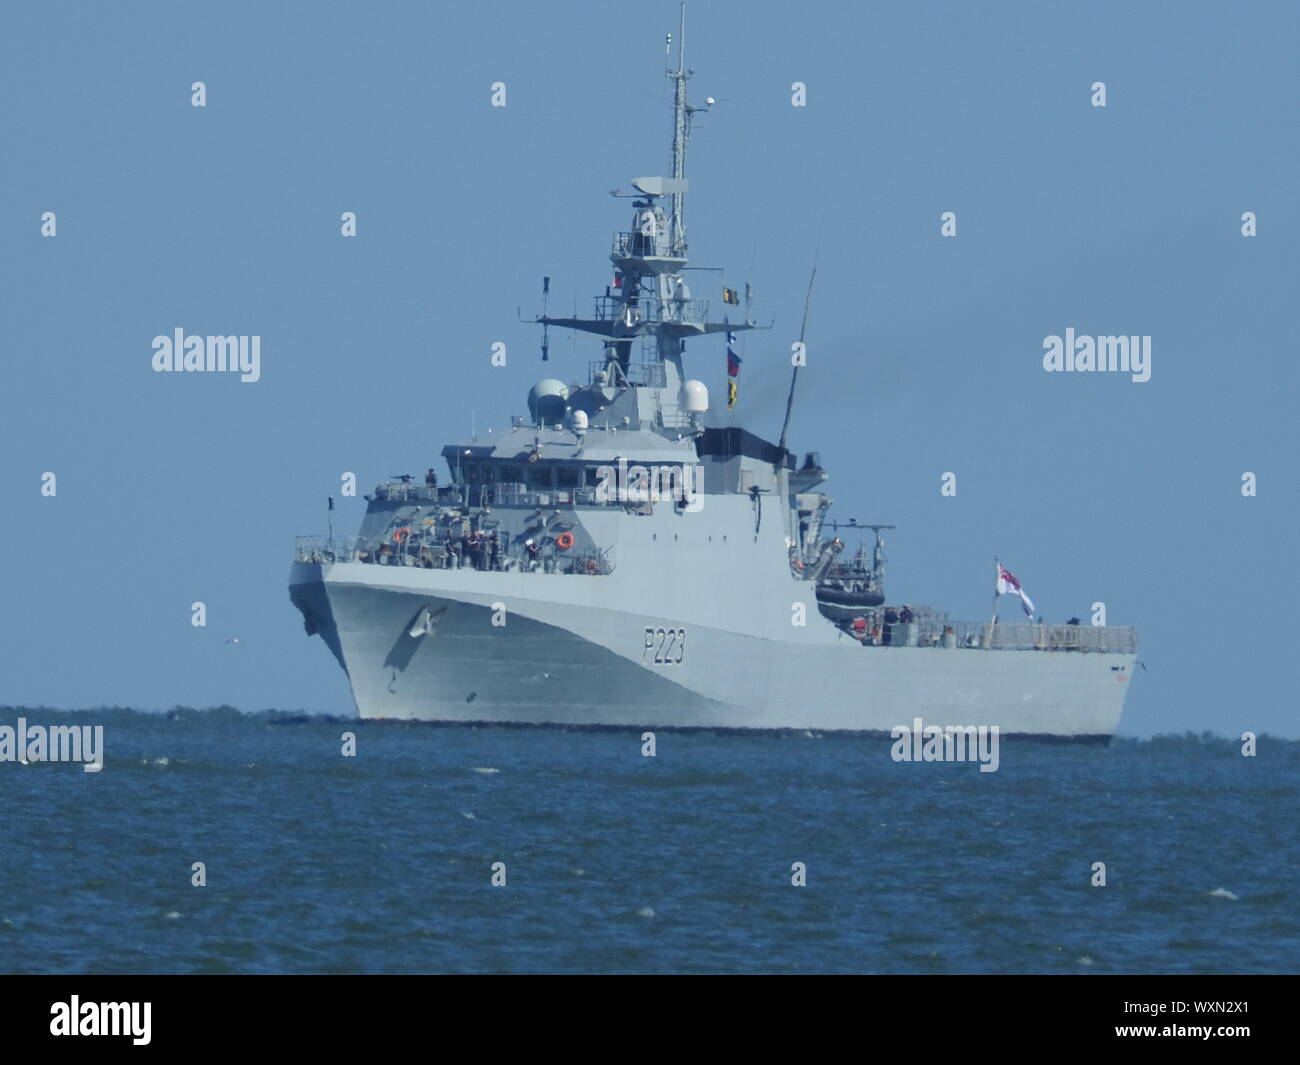 Sheerness, Kent, UK. 17th September, 2019. HMS Medway entering the river Medway at Sheerness, Kent at lunchtime. She is headed to Chatham and unusually will be officially commissioned at the place she is named after during her stay. HMS Medway is a 90-metre offshore patrol vessel and will be involved in counter-terrorism and anti-smuggling operations to help keep Britain safe. Credit: James Bell/Alamy Live News Stock Photo